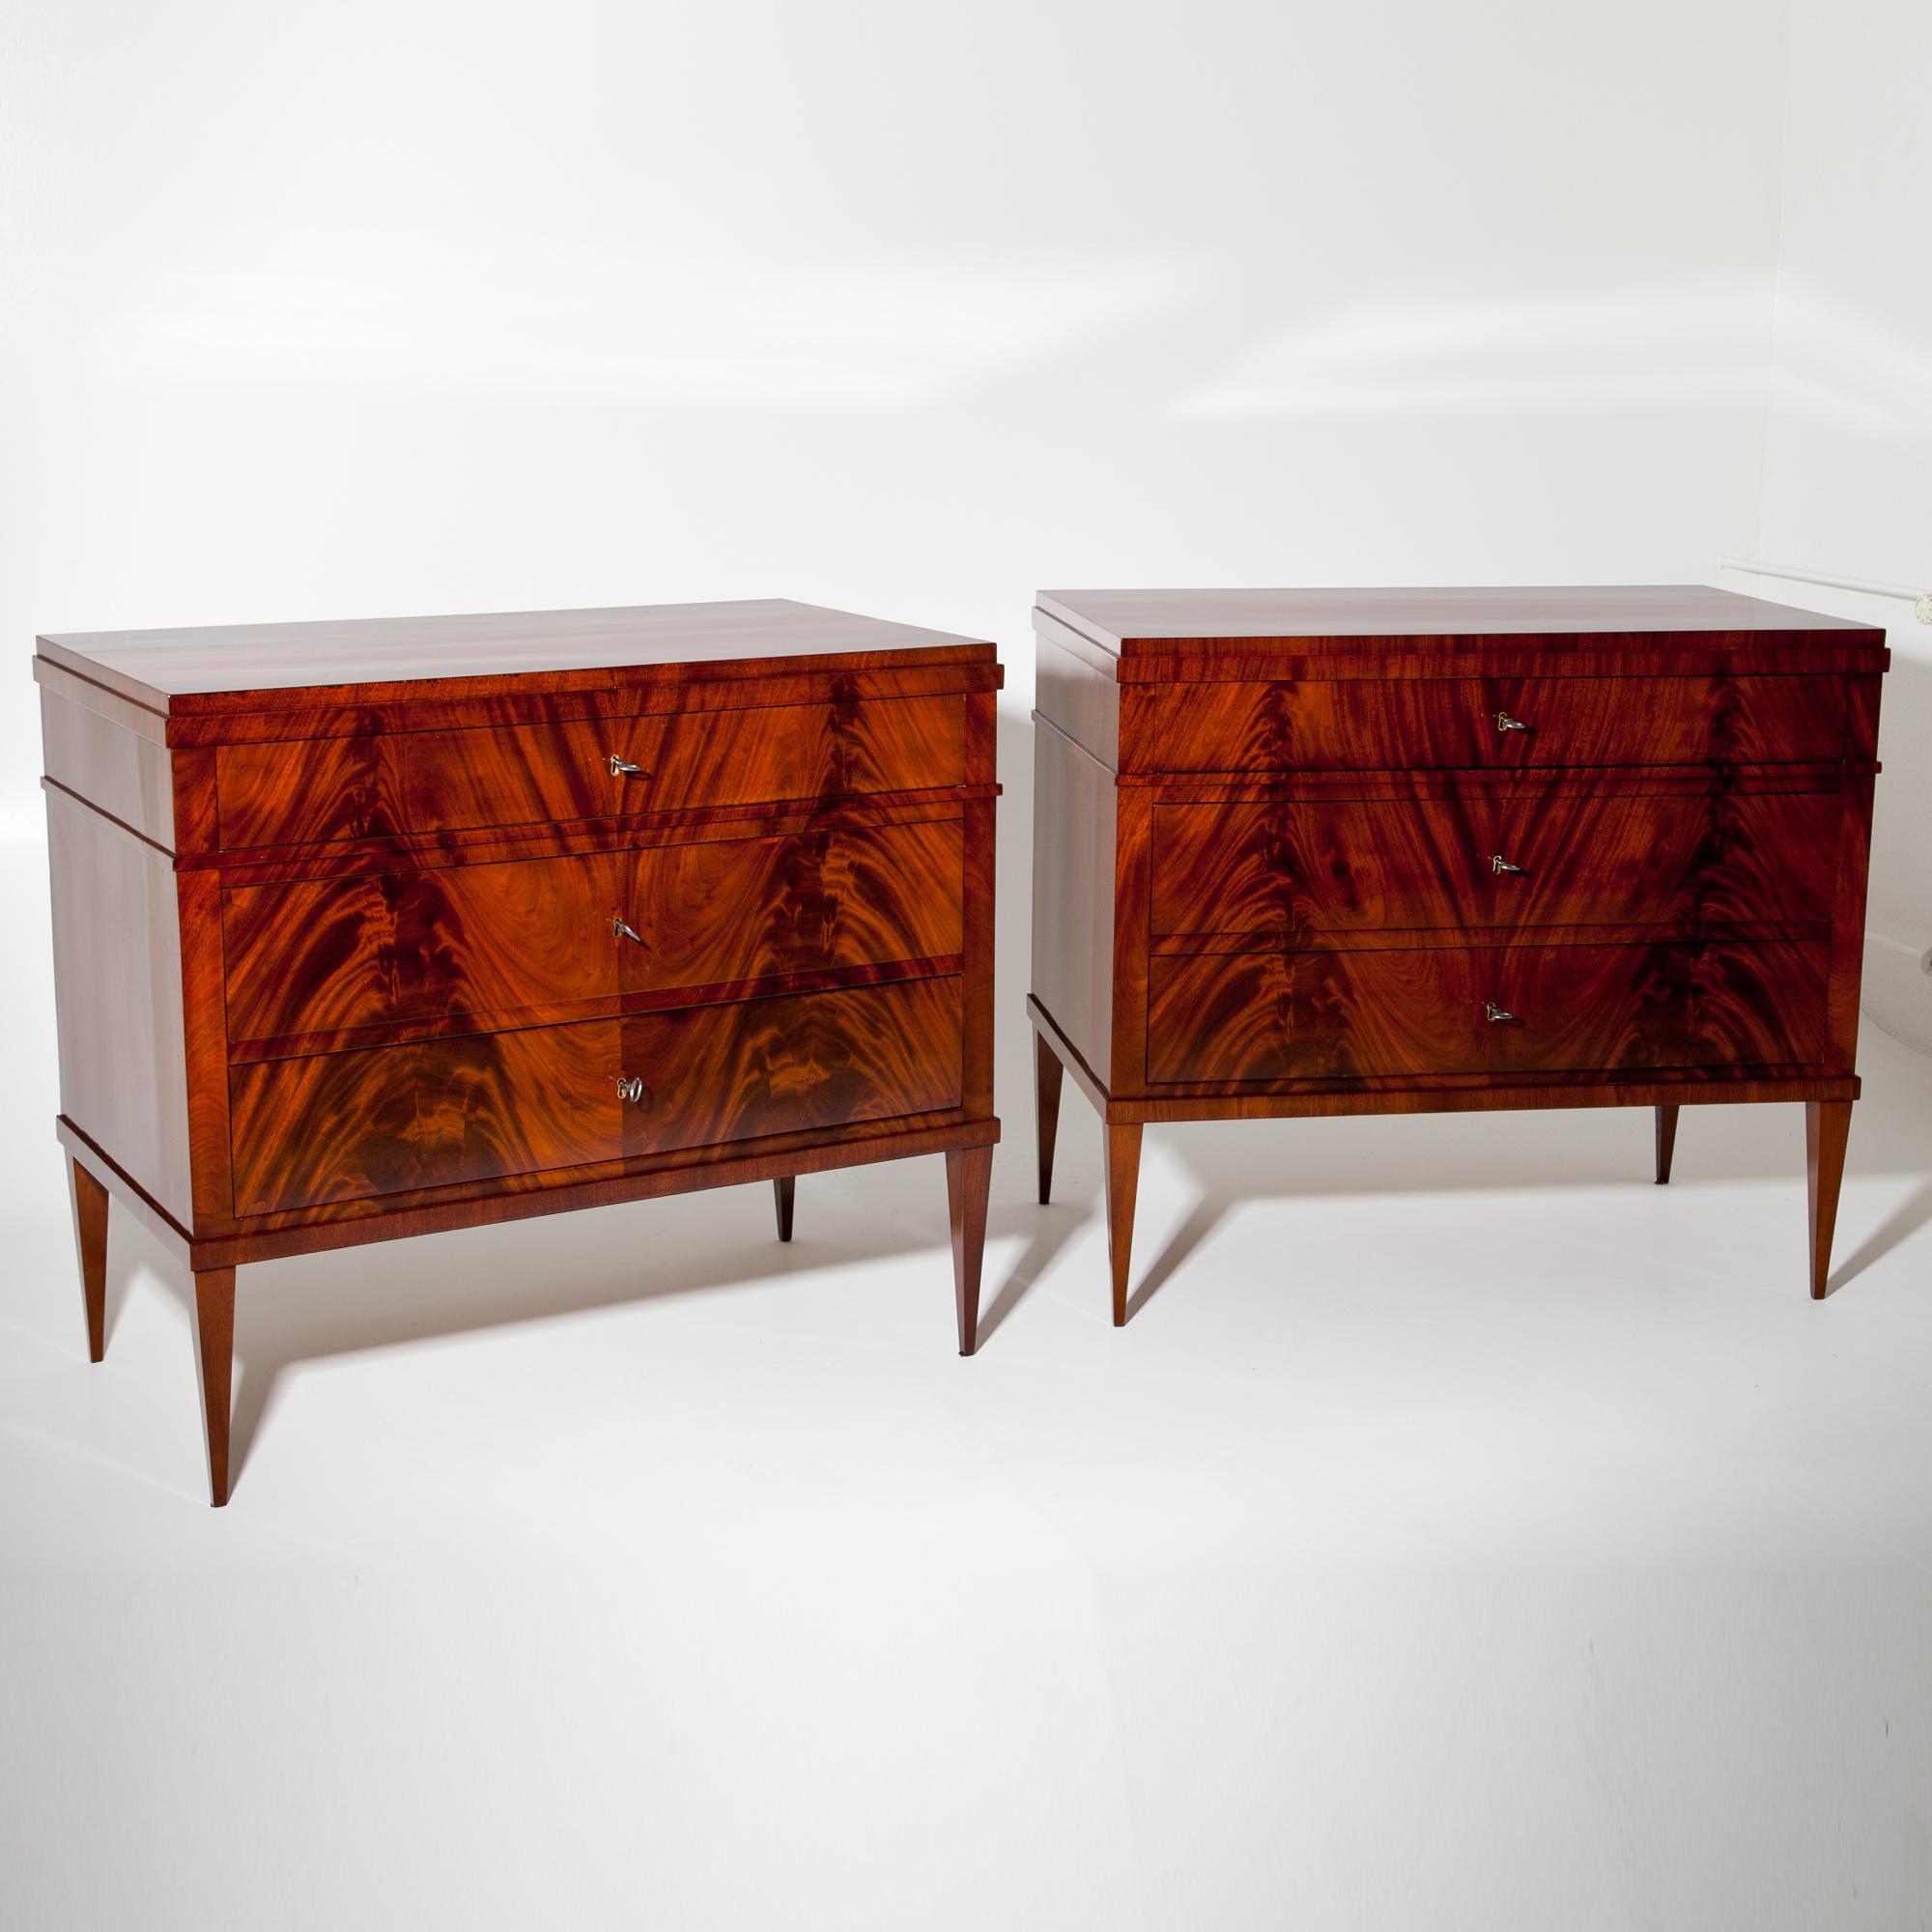 Pair of mahogany-veneered chests of drawers, standing on slender tapered legs. Profiled trusses accentuate the top drawer. The front shows a beautiful flamed mahogany veneer. The commodes were professionally refurbished and hand-polished.